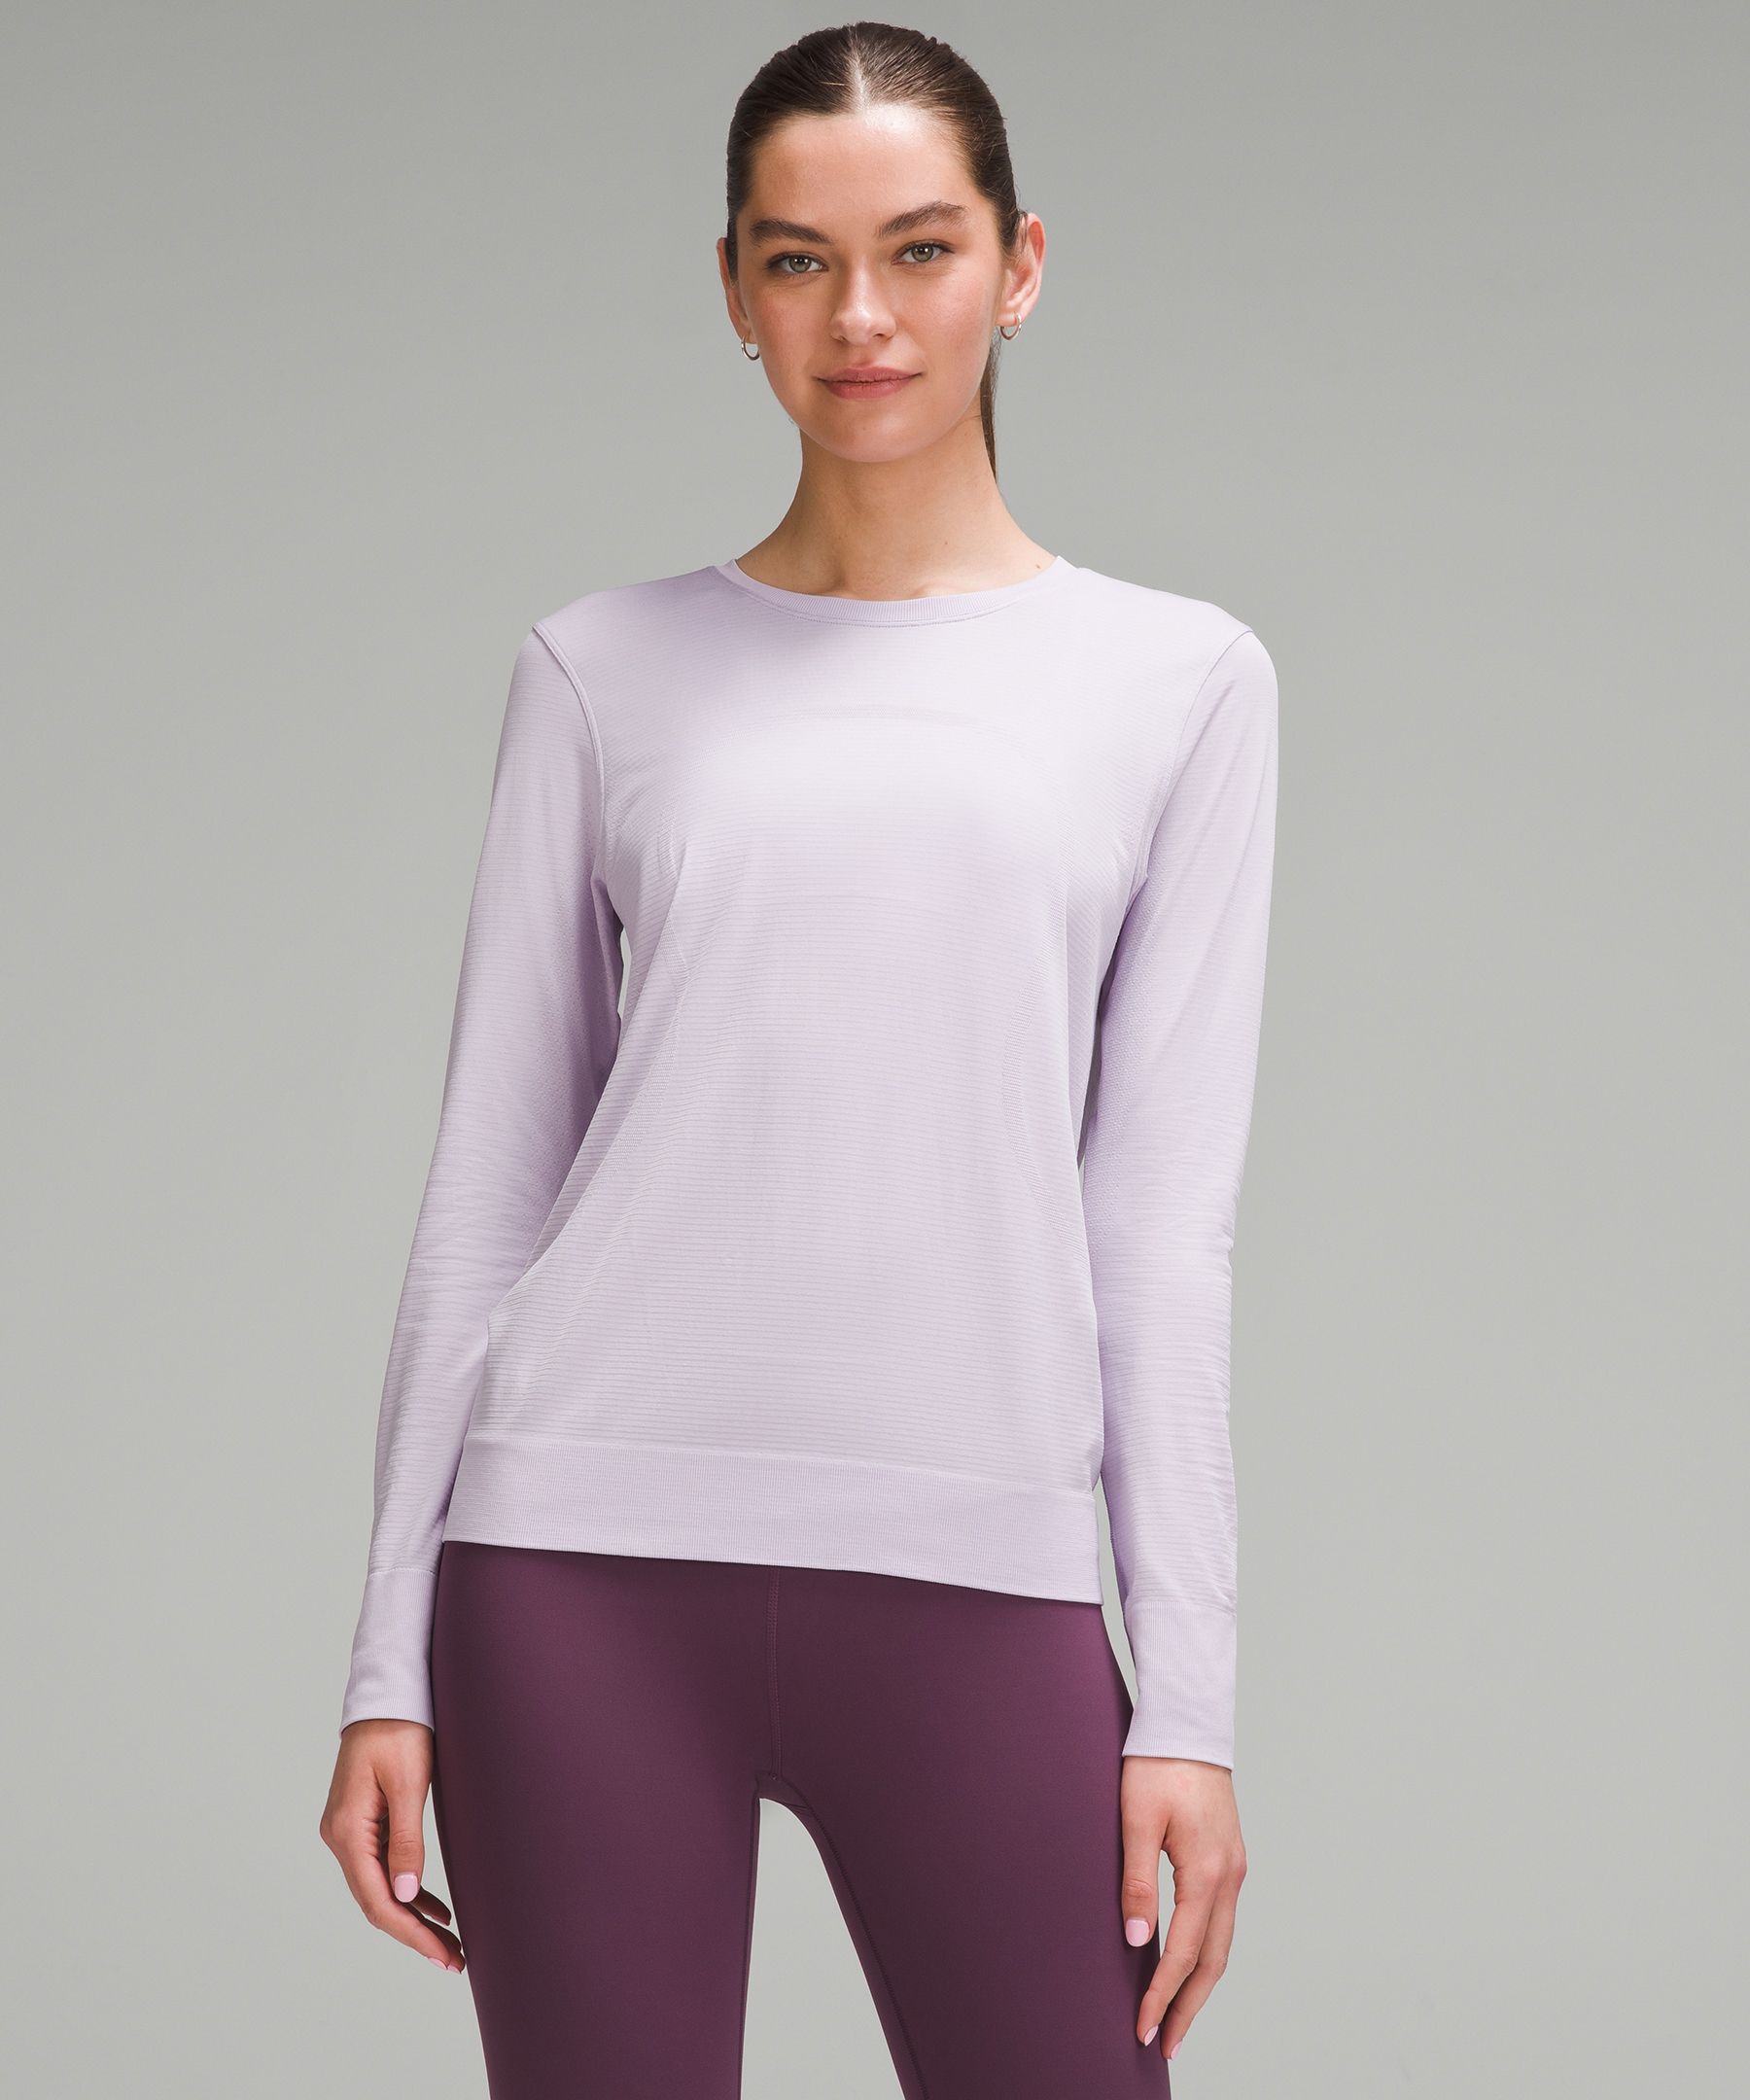 Lululemon Swiftly Tech Long Sleeve Crew, Iced Iris, 10 : Buy Online at Best  Price in KSA - Souq is now : Fashion